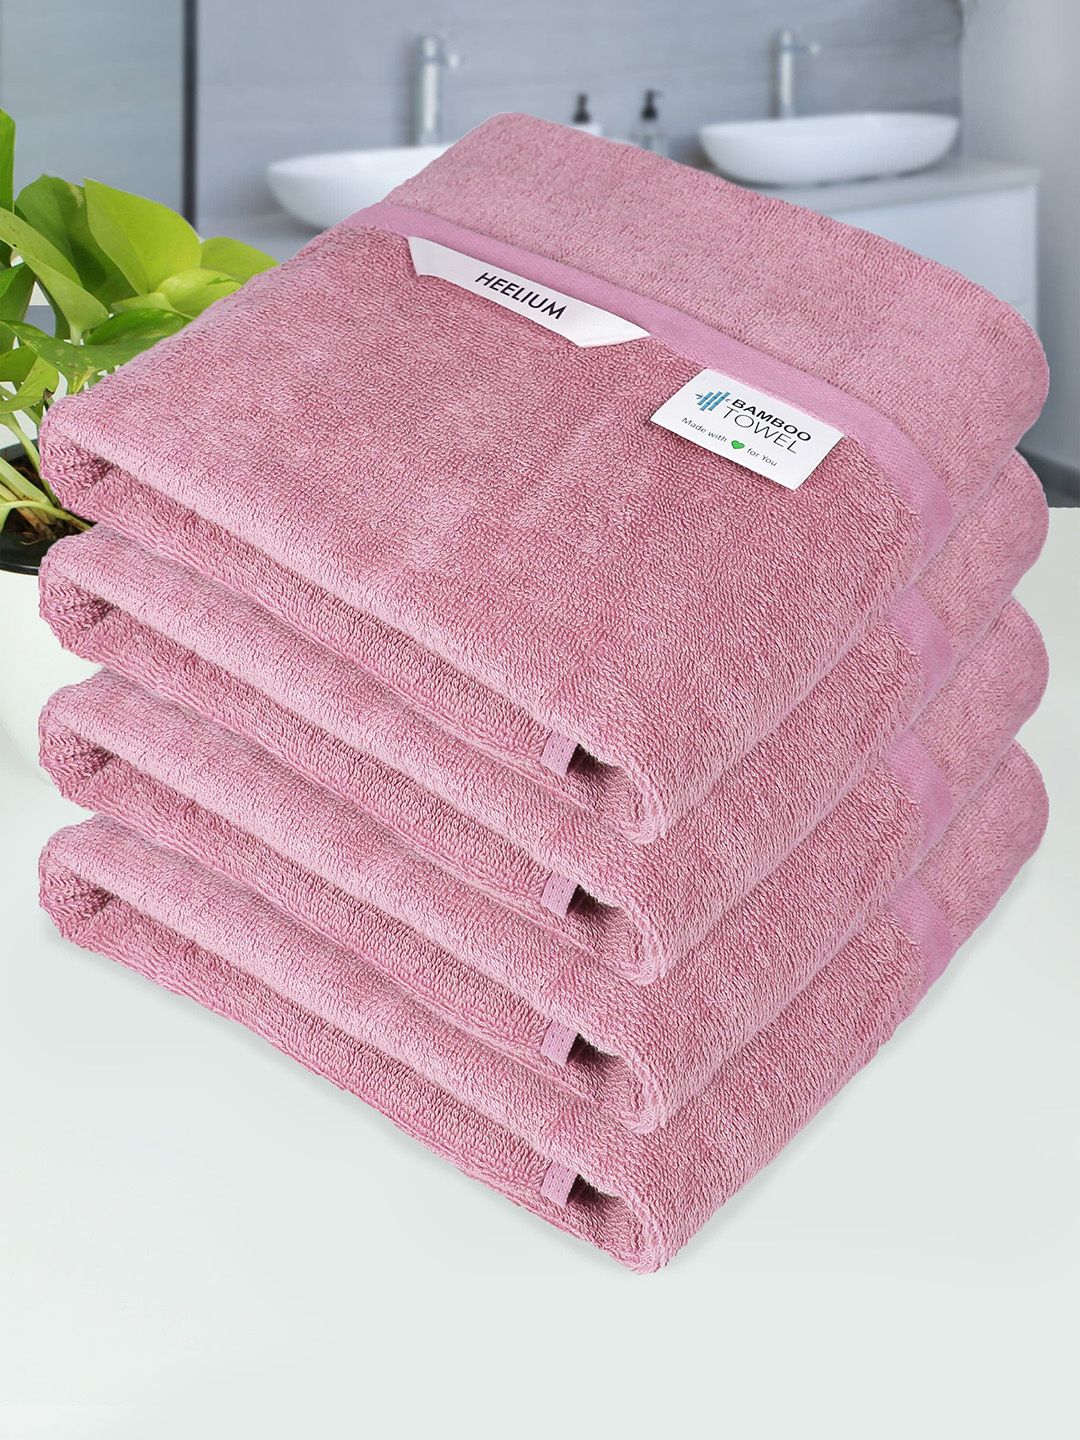 Heelium Set Of 4 Peach-Colored Solid 400 GSM Bamboo Bath Towels Price in India